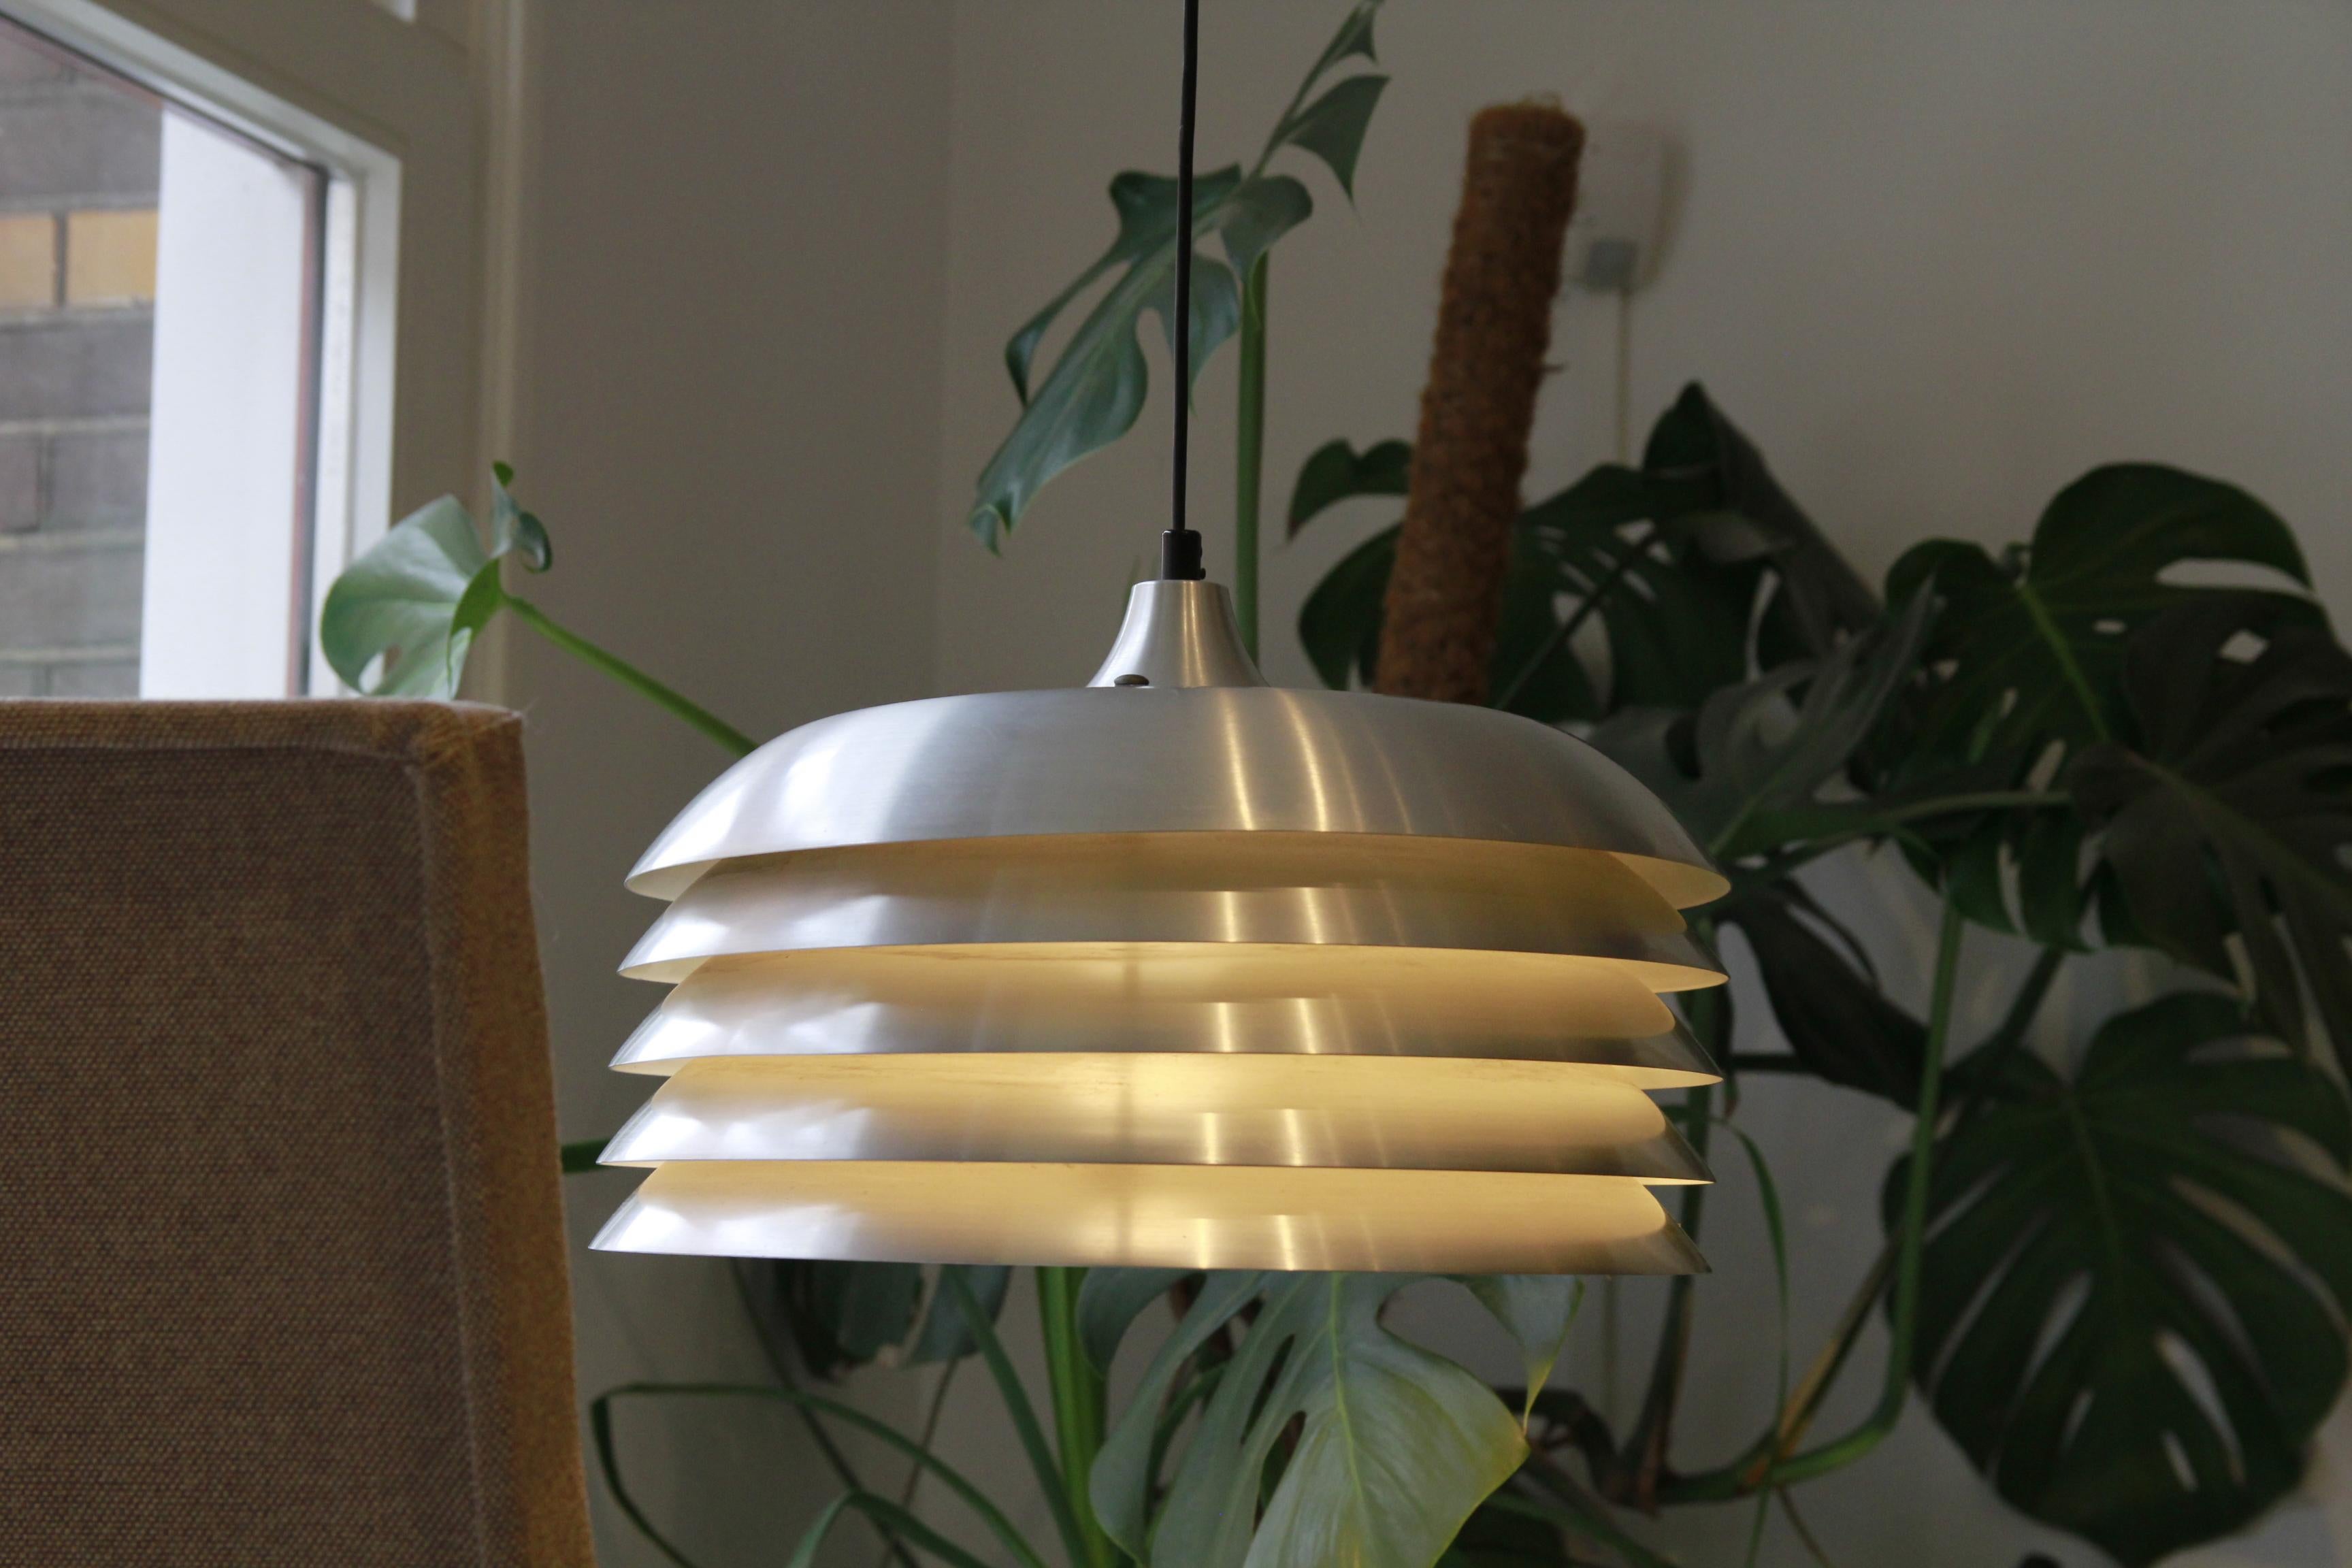 Rare ceiling lamp model 742 designed by Hans-Agne Jakobsson and produced by Hans-Agne Jakobsson for the Swedish company AB Markaryd. Model T742 is a minimalistic design lamp that is designed to distribute the light without glare in the eyes. The